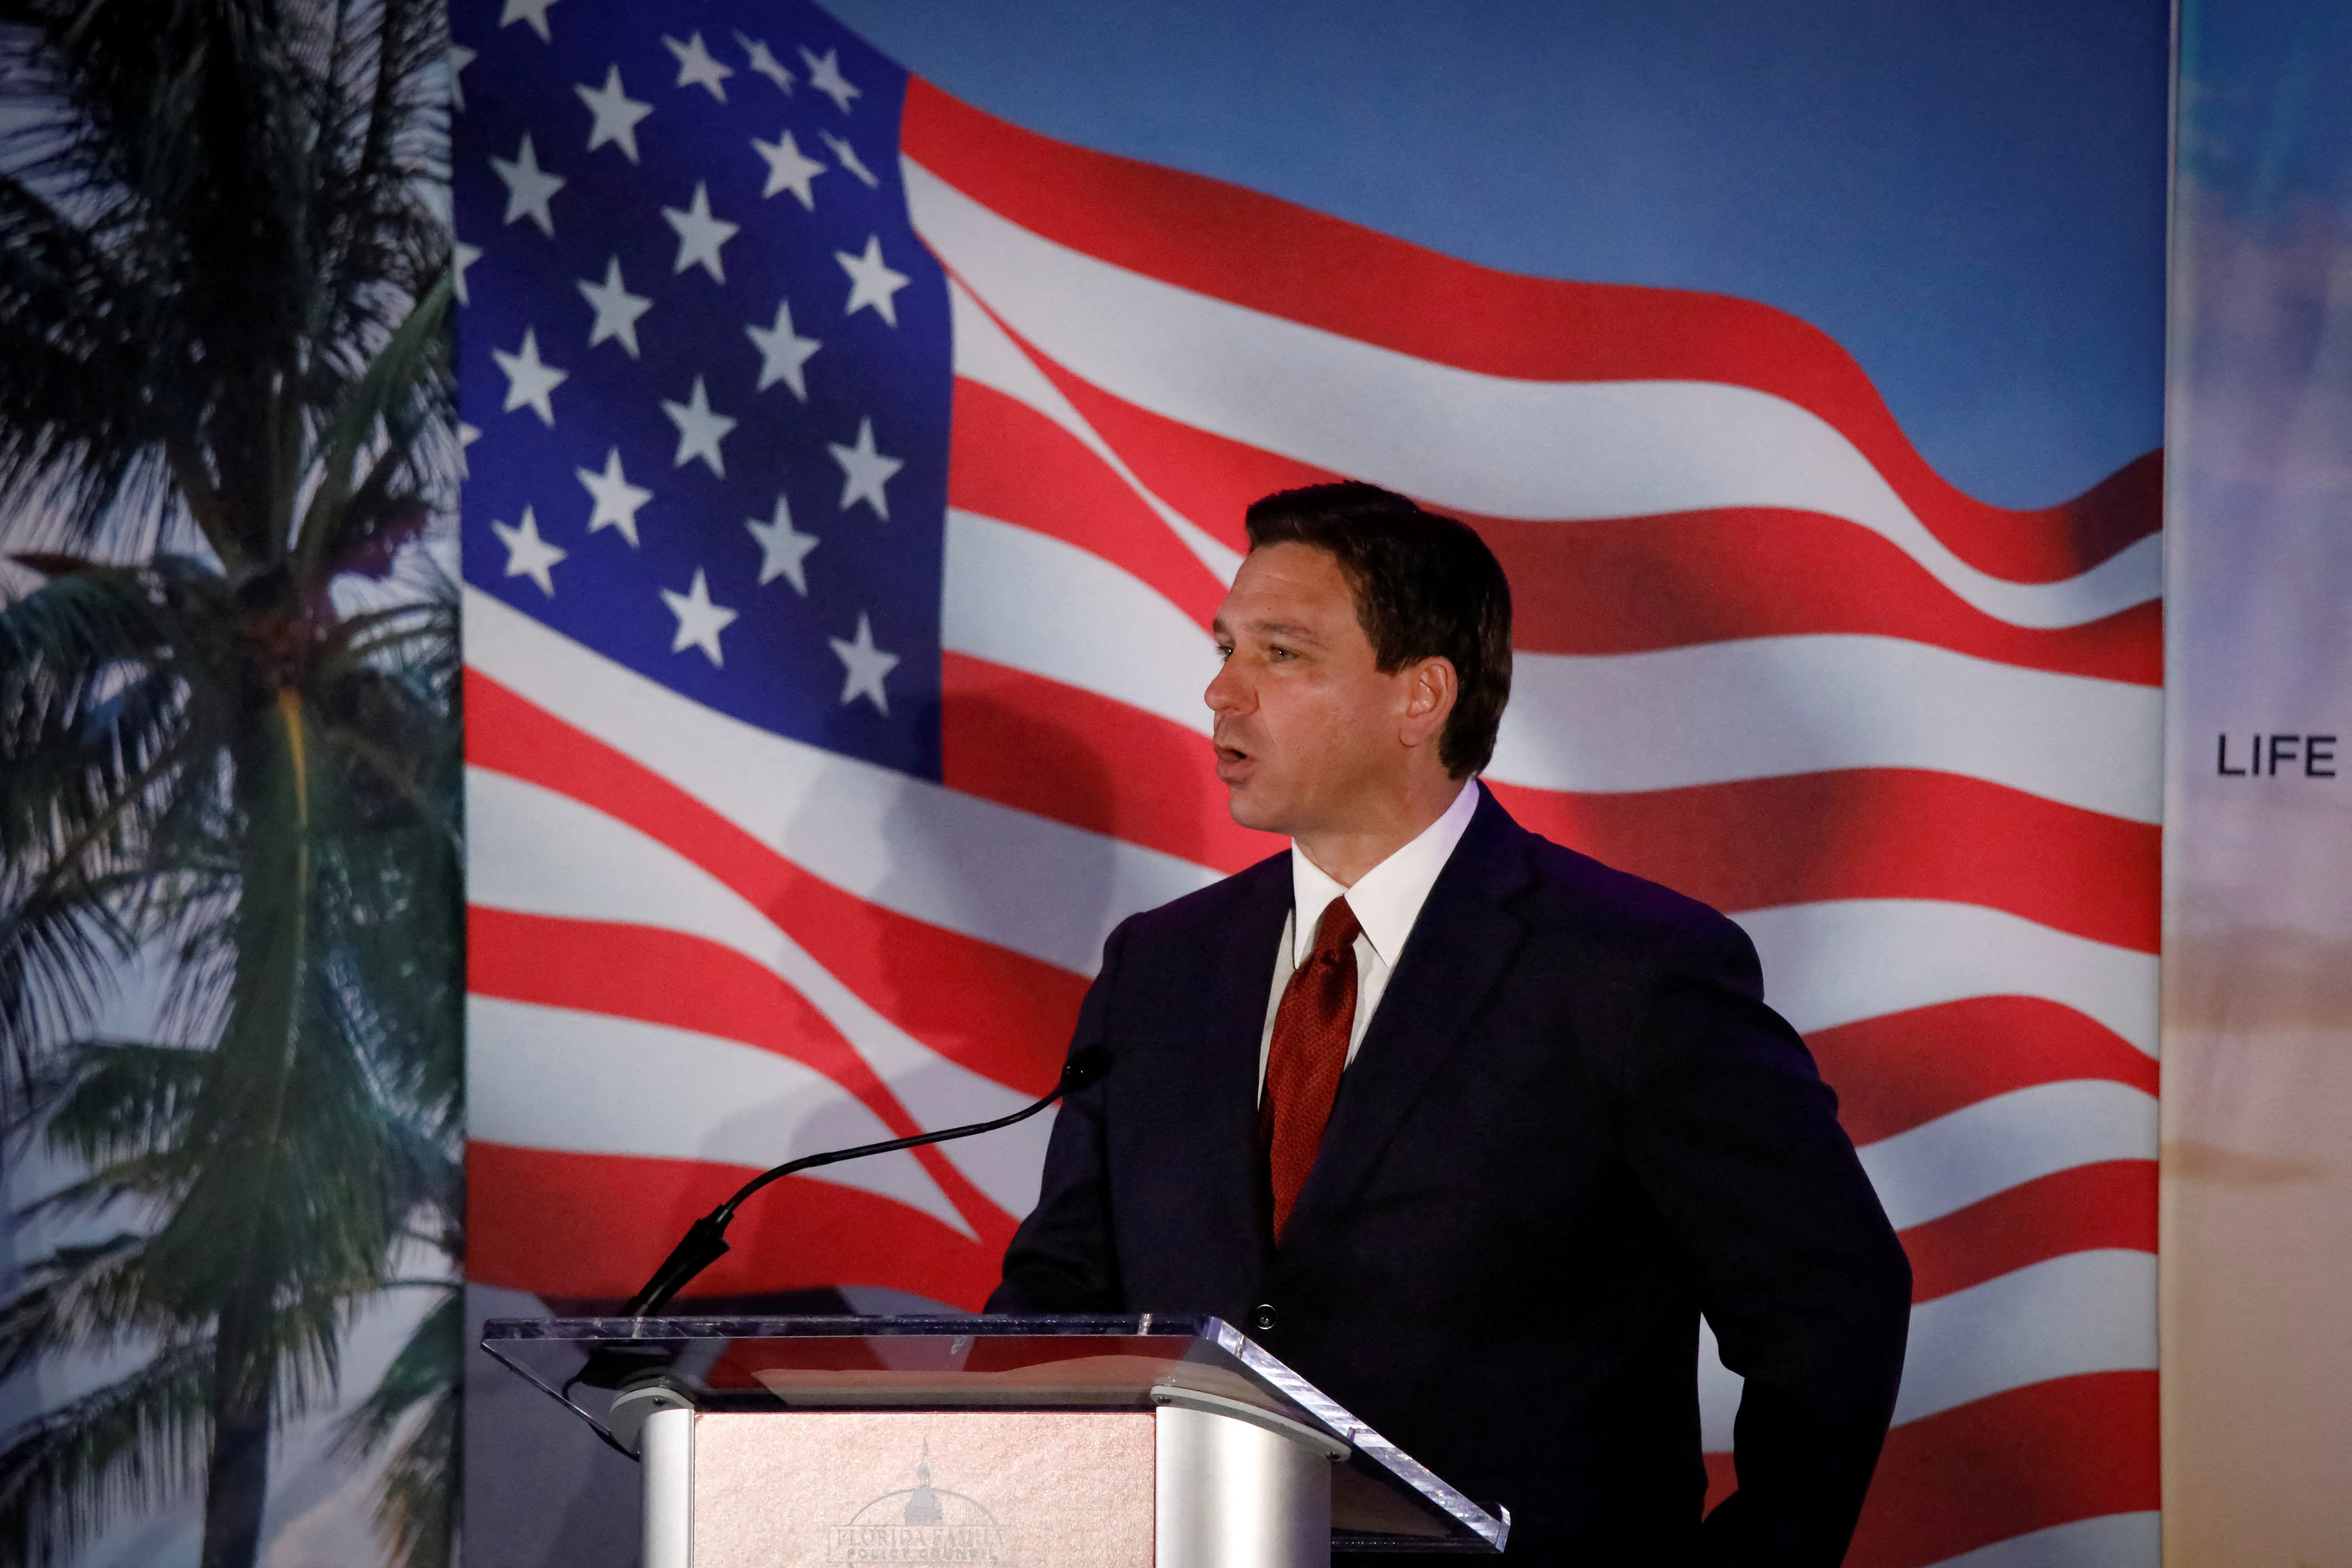 Florida Governor Ron DeSantis attends the Florida Family Policy Council Annual Dinner Gala, in Orlando